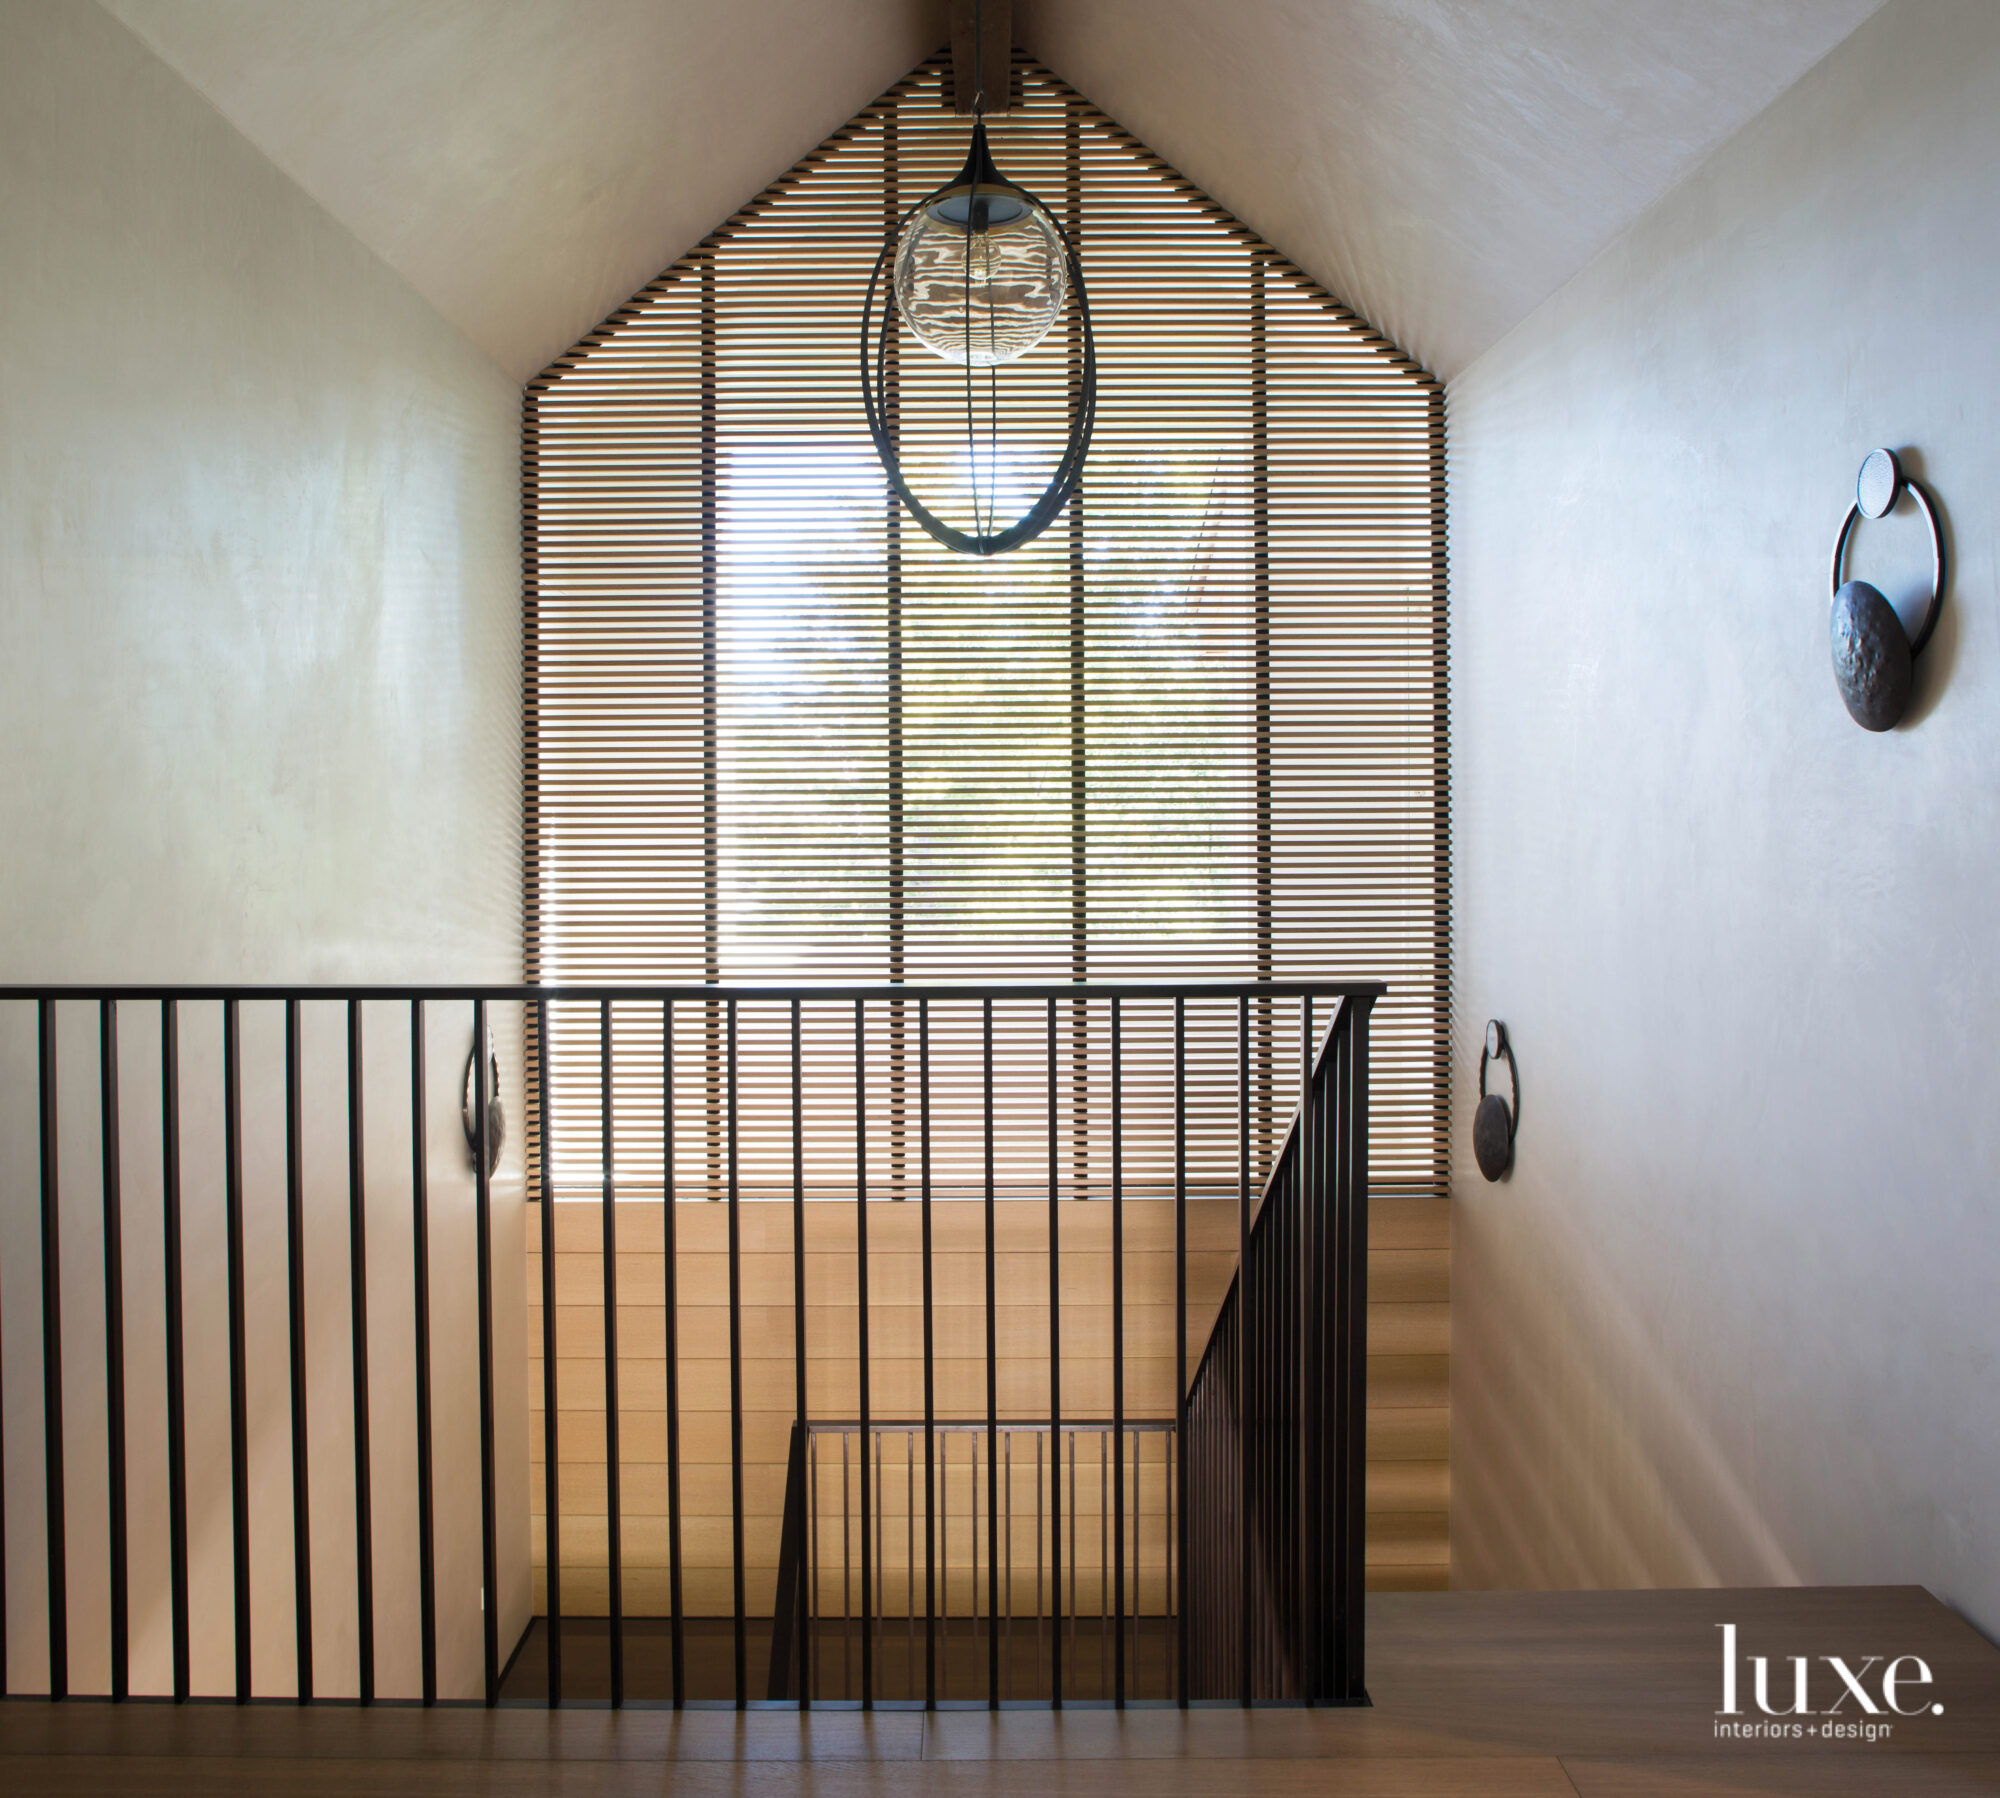 A stairway features a slatted window and a statement light fixture.